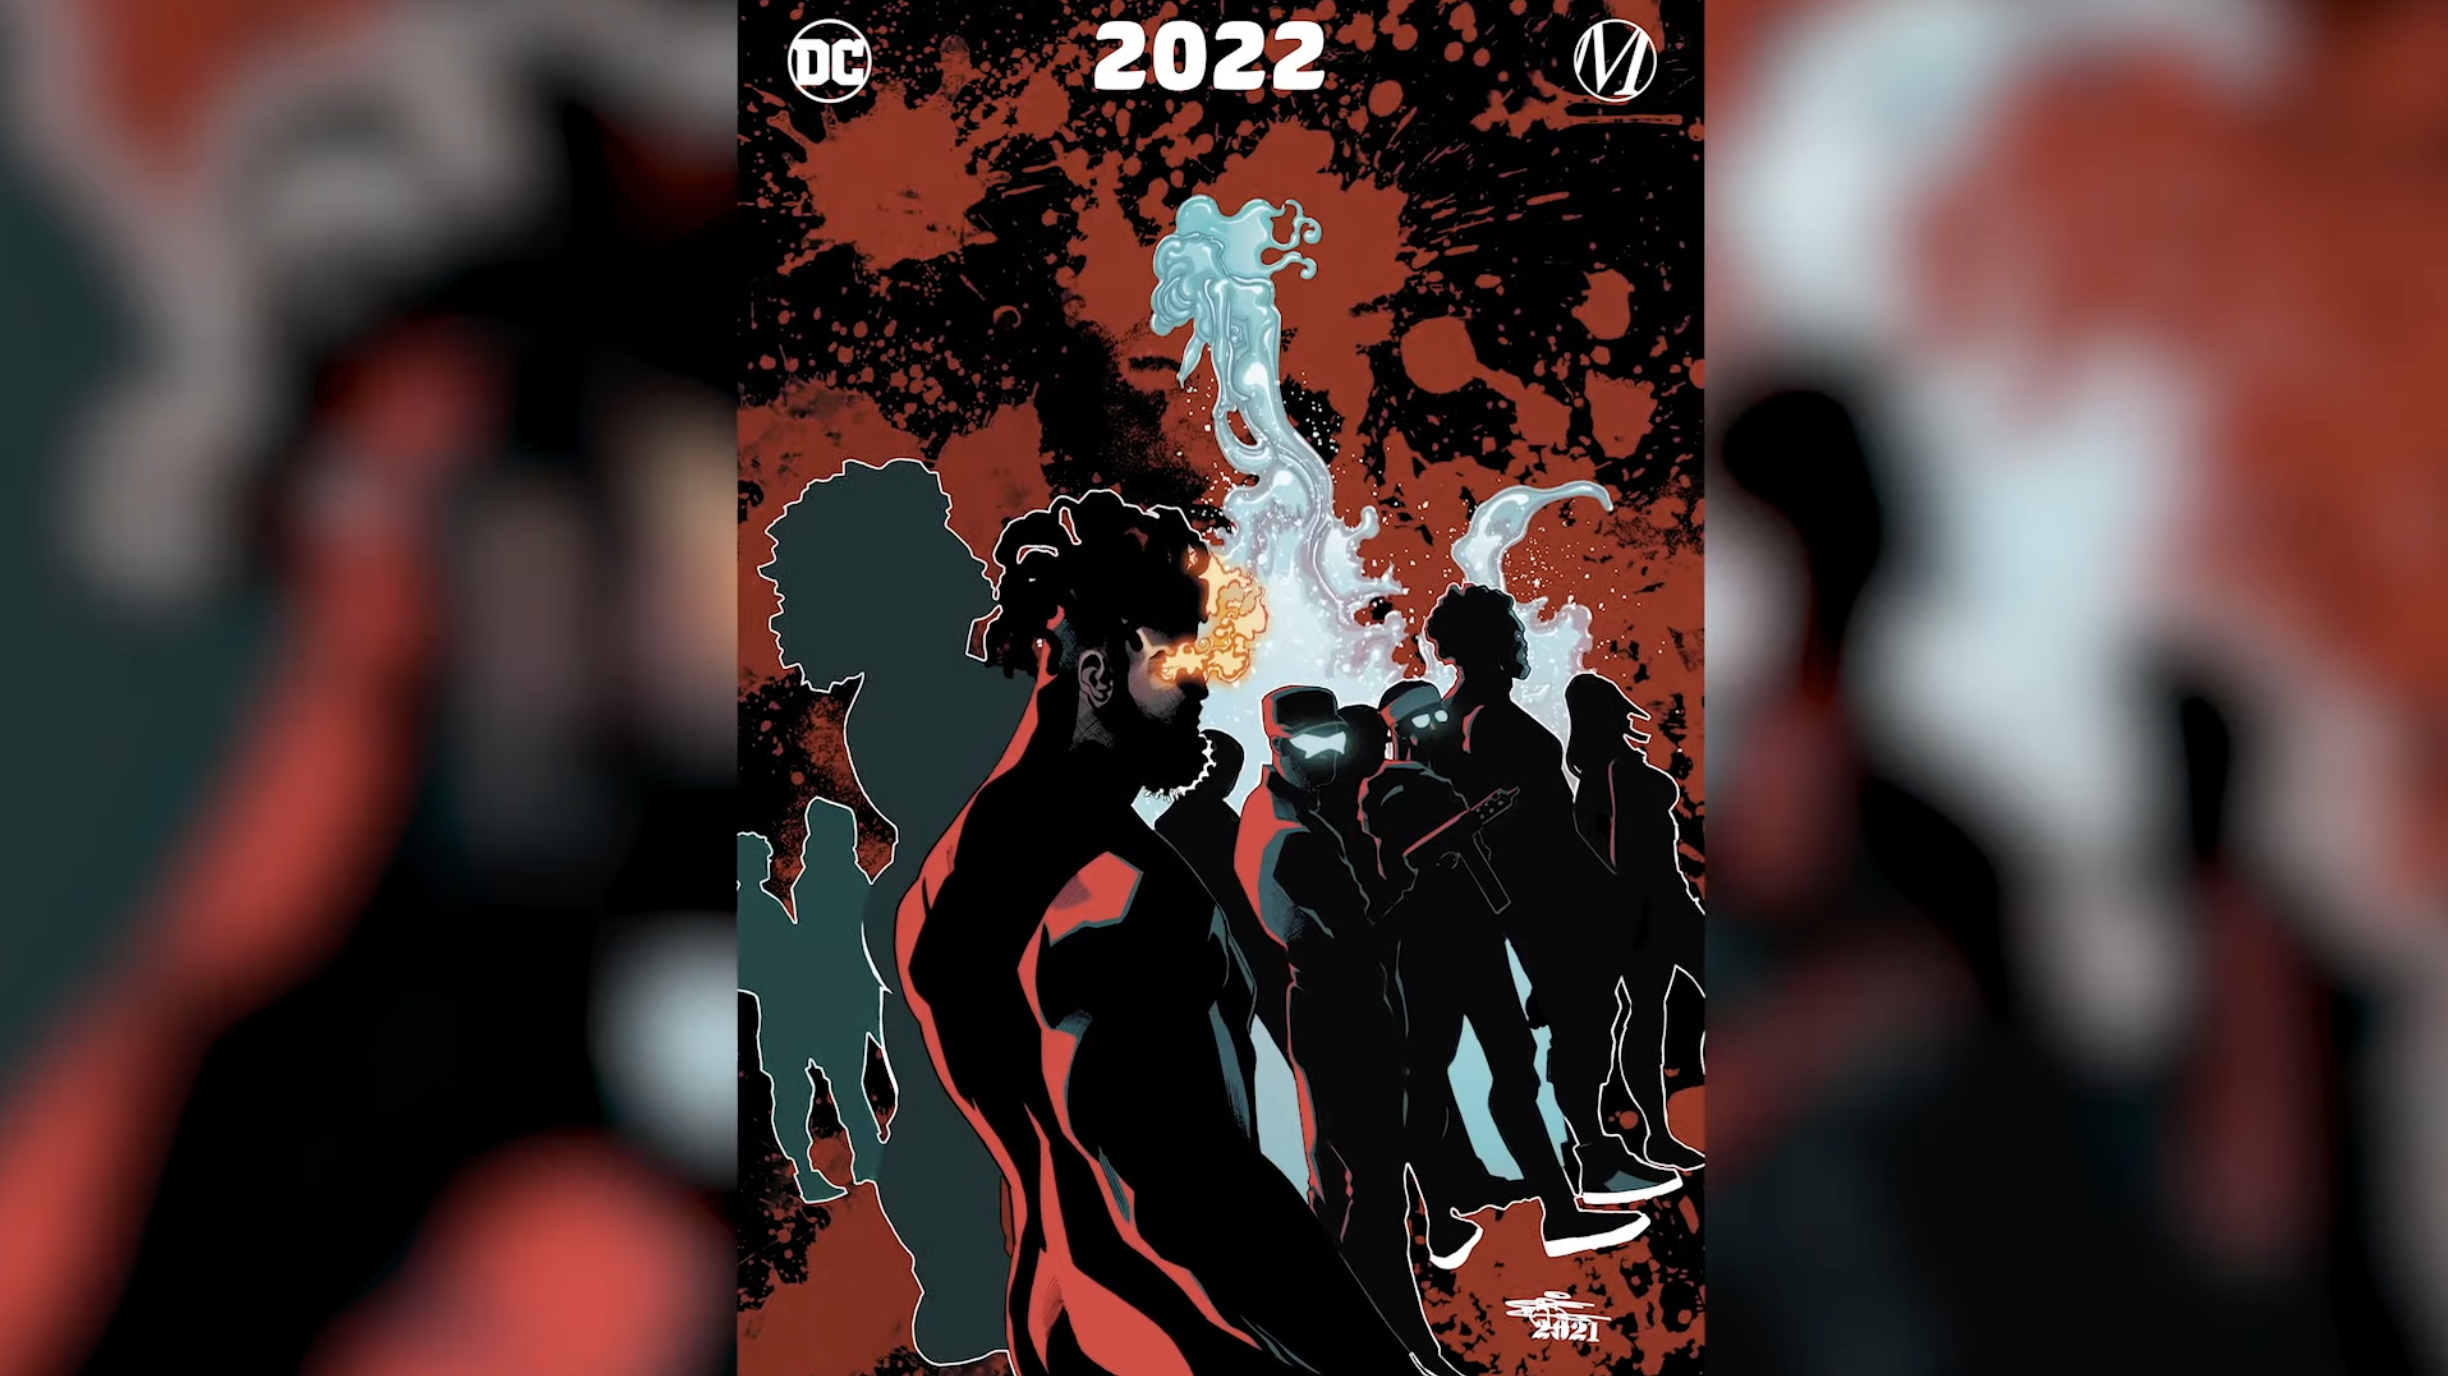 Blood Syndicate's return confirmed at DC Fandome